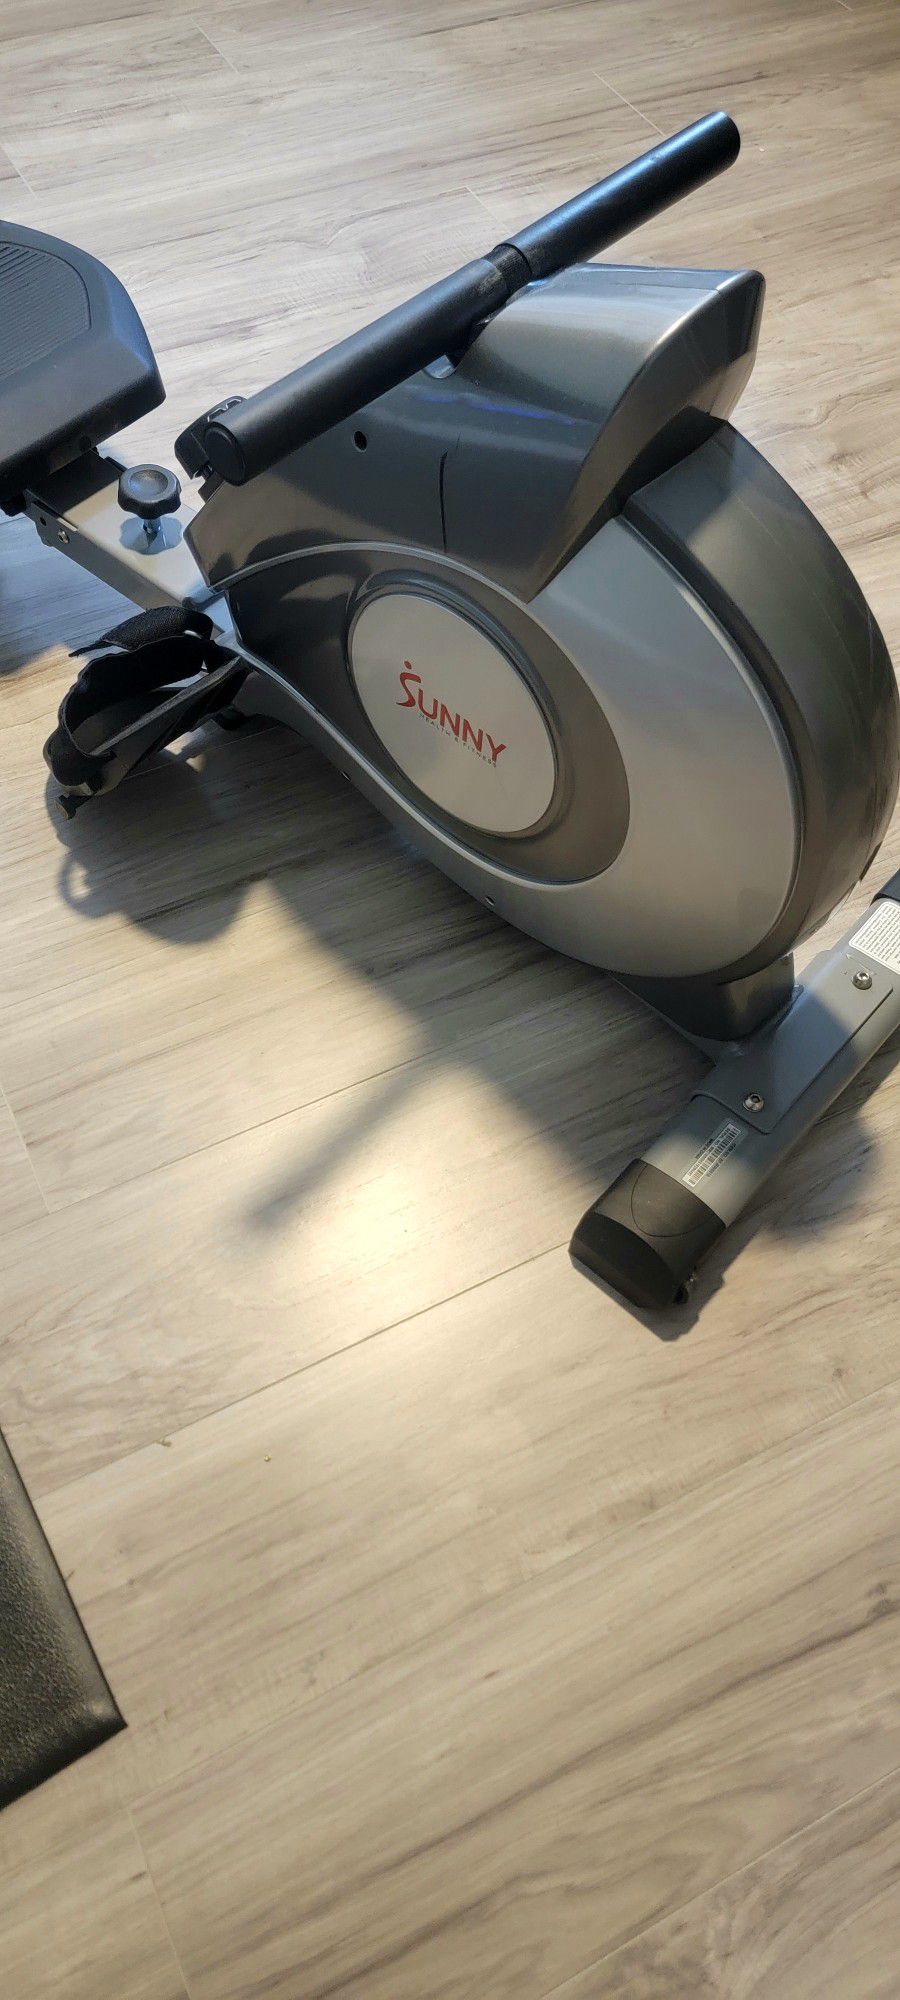 Sunny Magneric Rowing Machine $80.00 OBO 